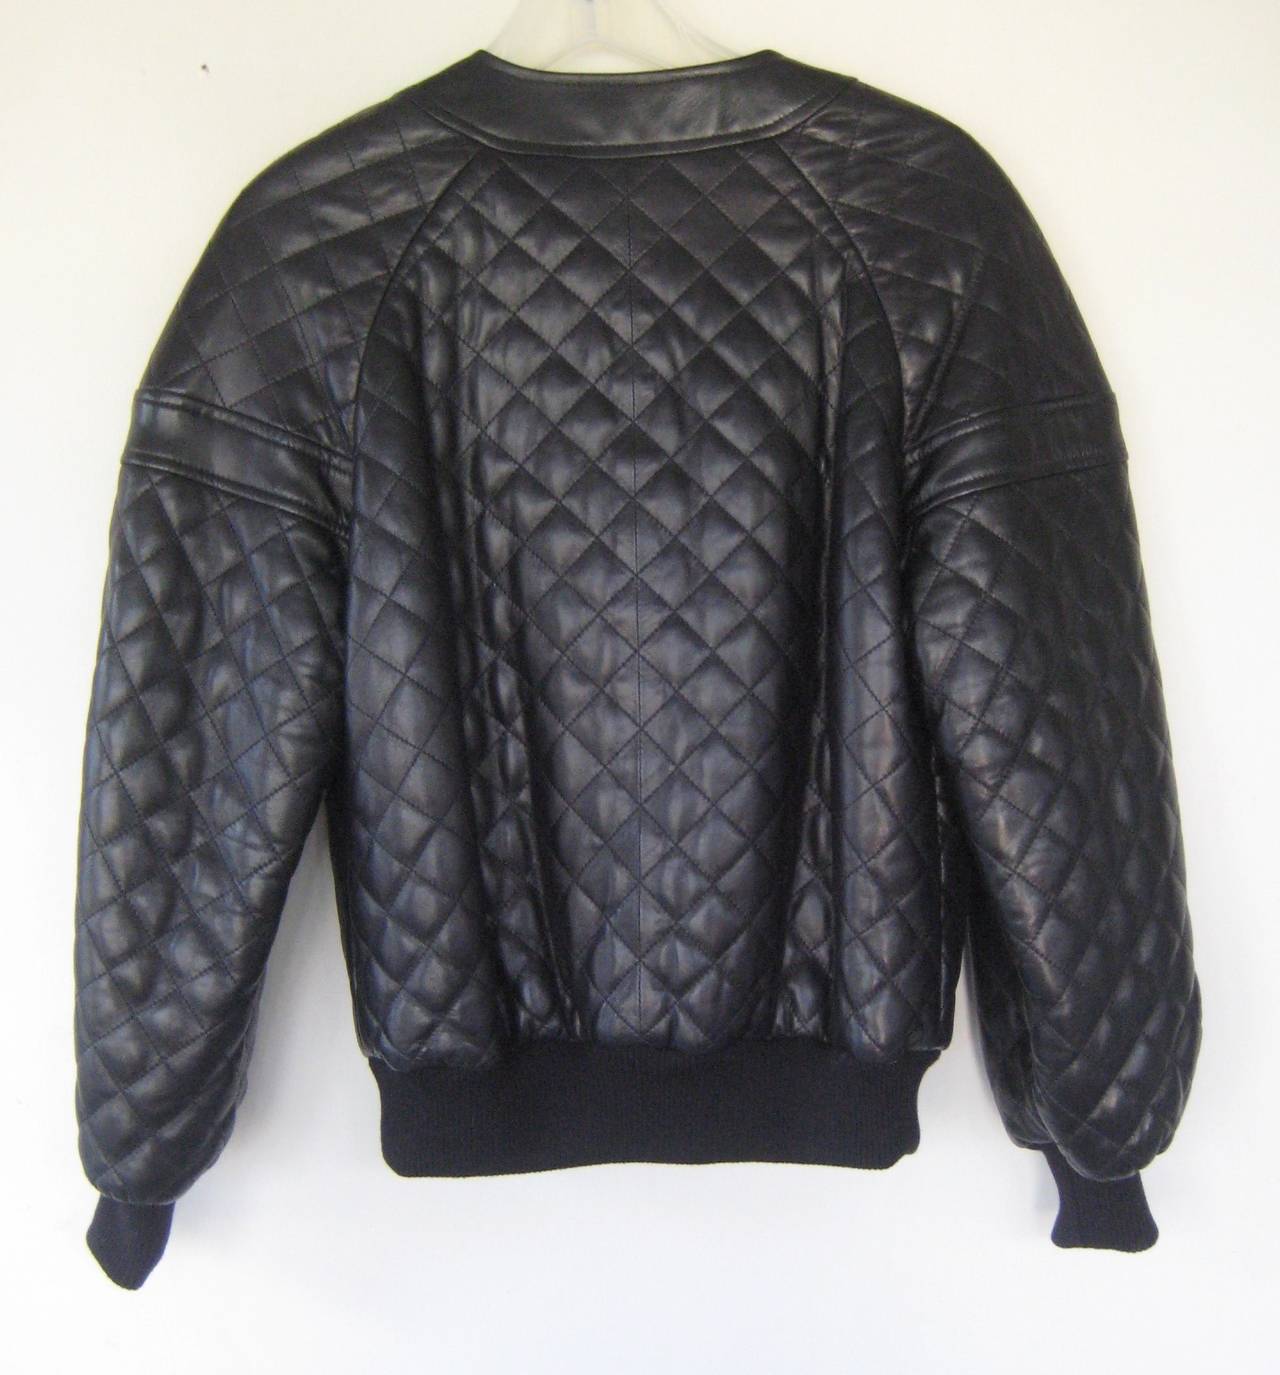 1990 Chanel quilted leather bomber jacket 
Wool knit waistband and cuffs
Logo snap buttons
Chain hem
Quilted silk linig